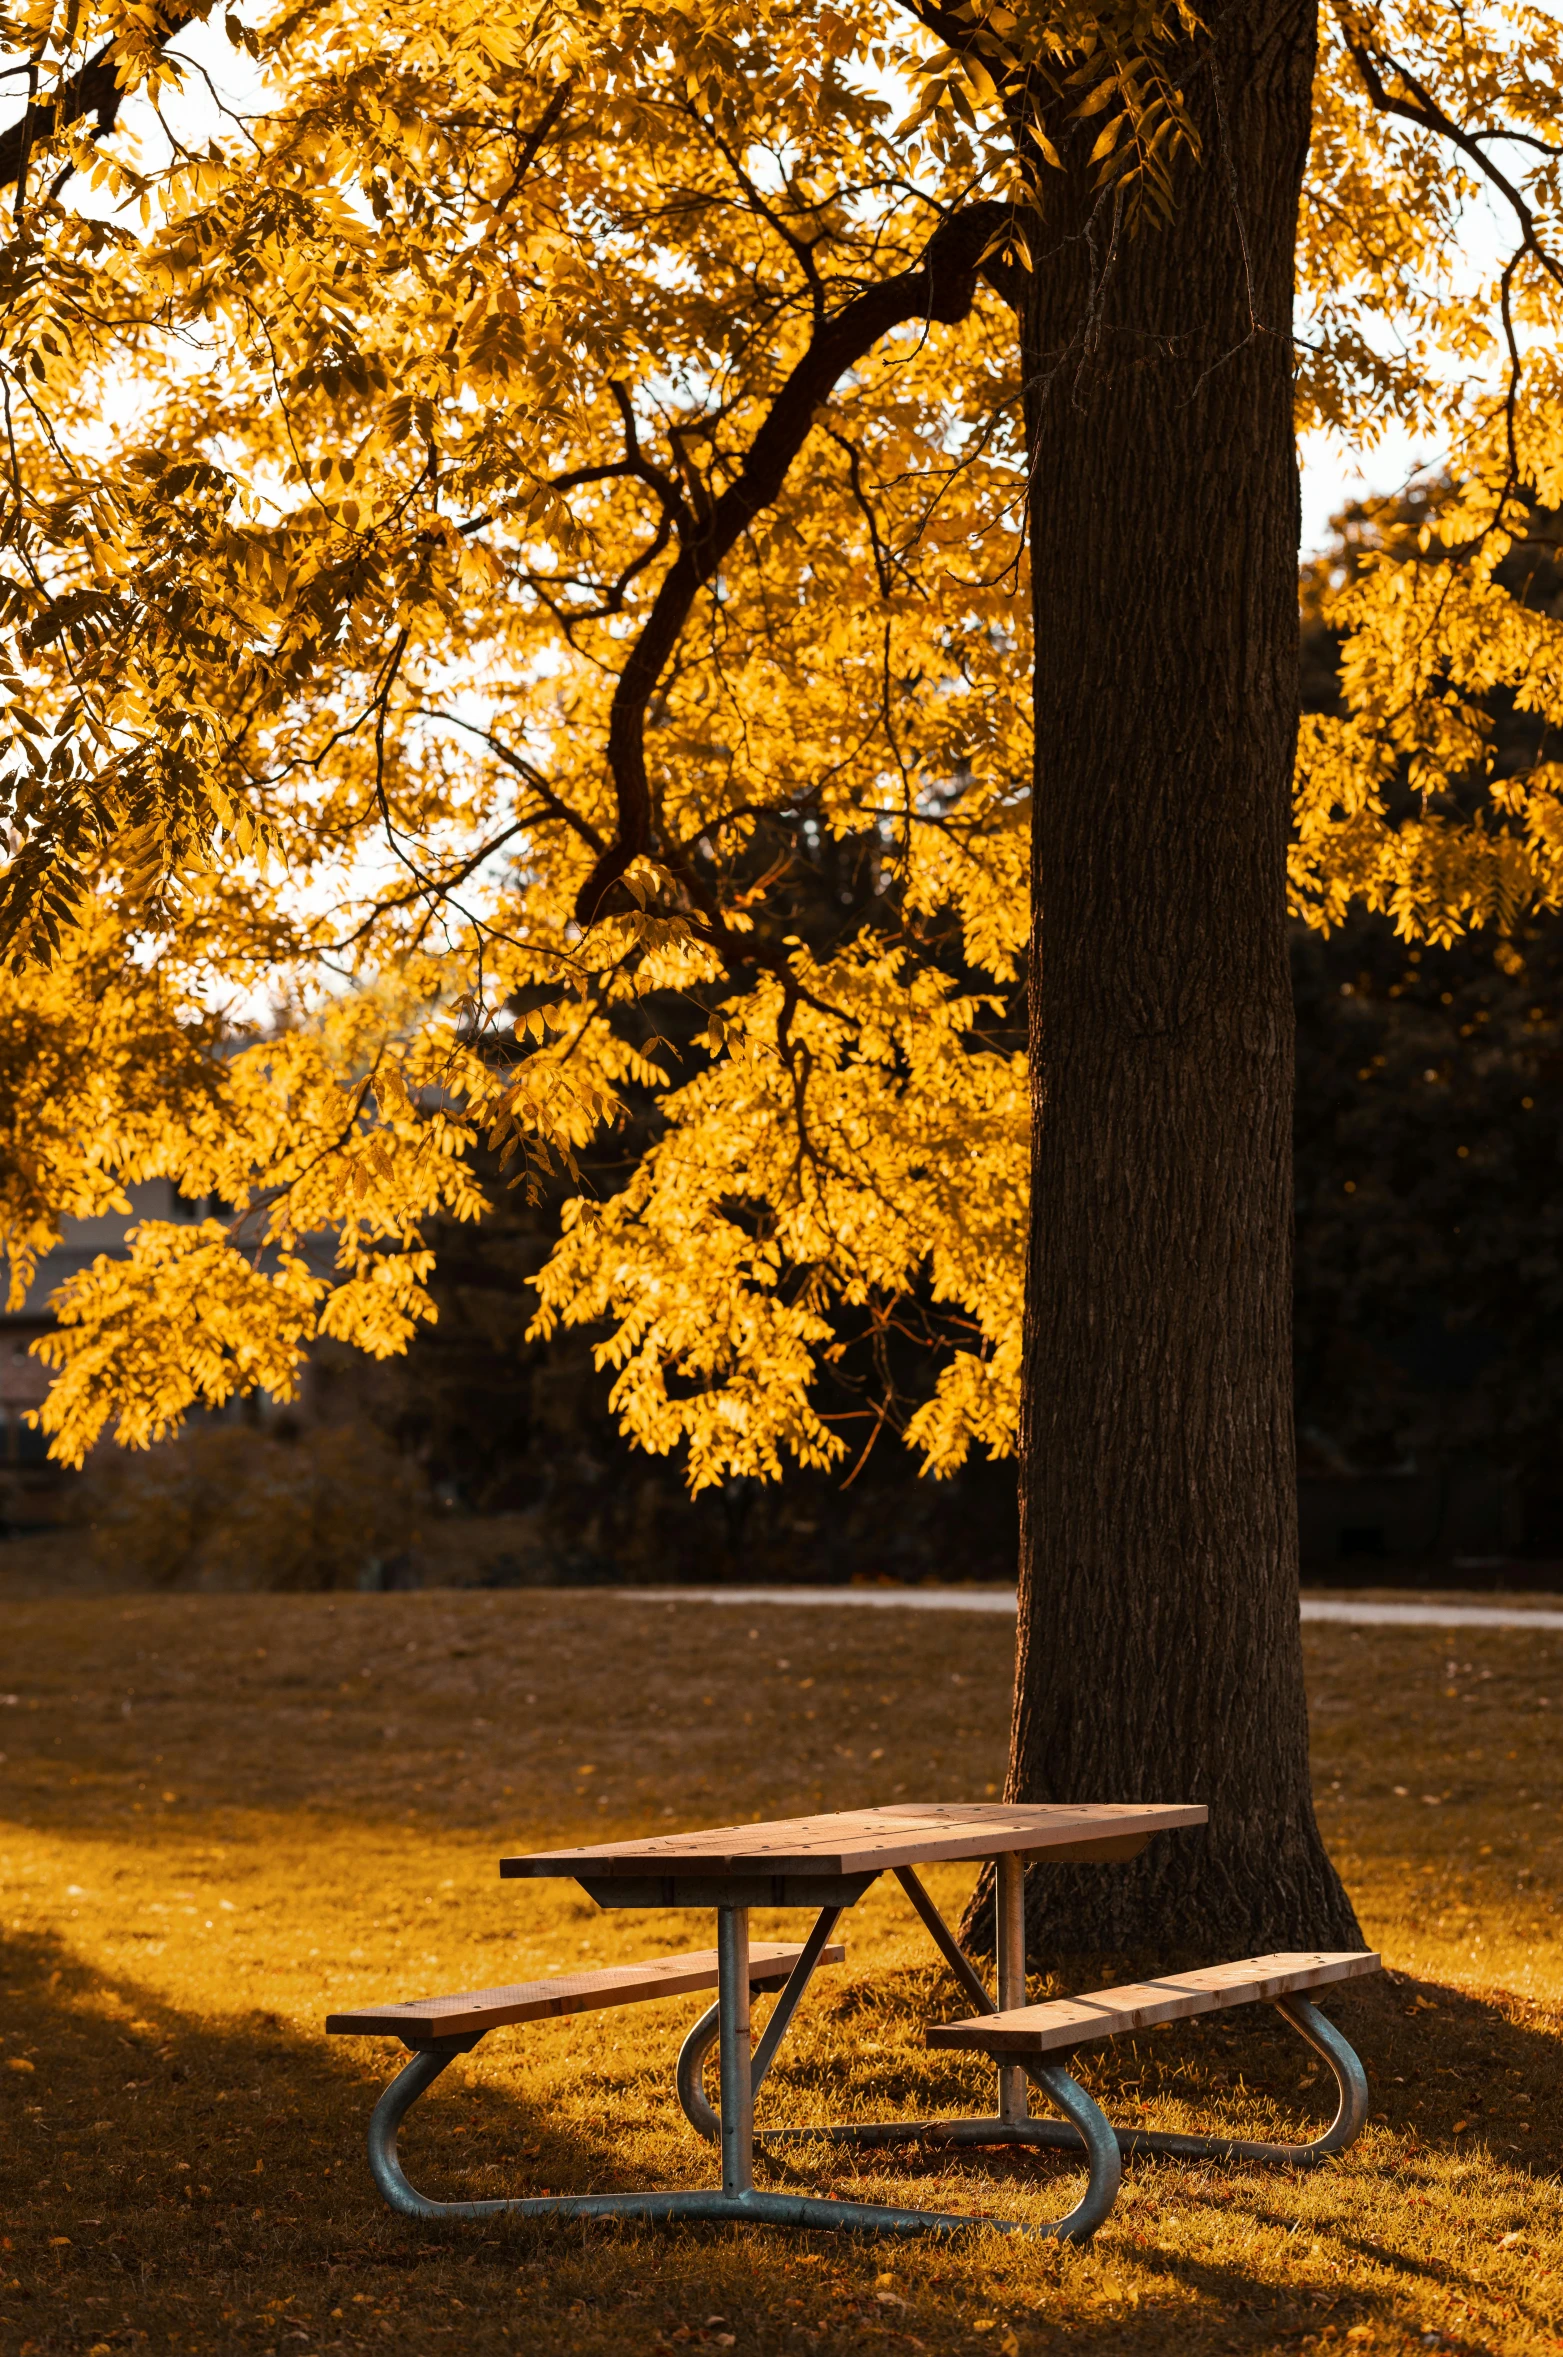 a bench underneath a yellow tree in a grassy area